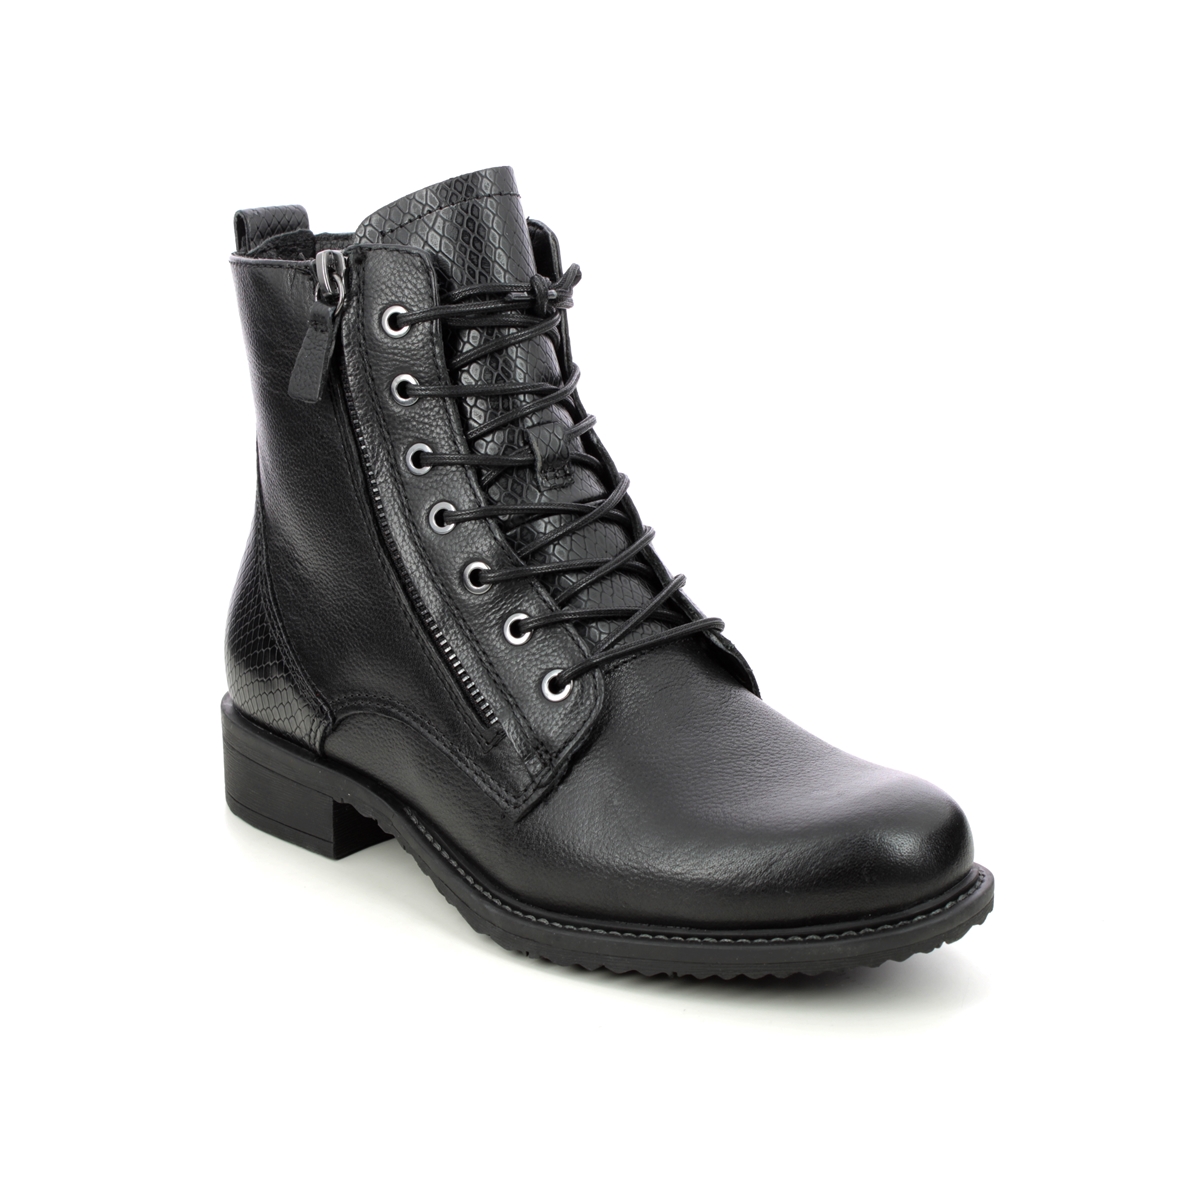 Tamaris Anouk Zip Ronja Black Leather Womens Lace Up Boots 25211-29-074 In Size 37 In Plain Black Leather